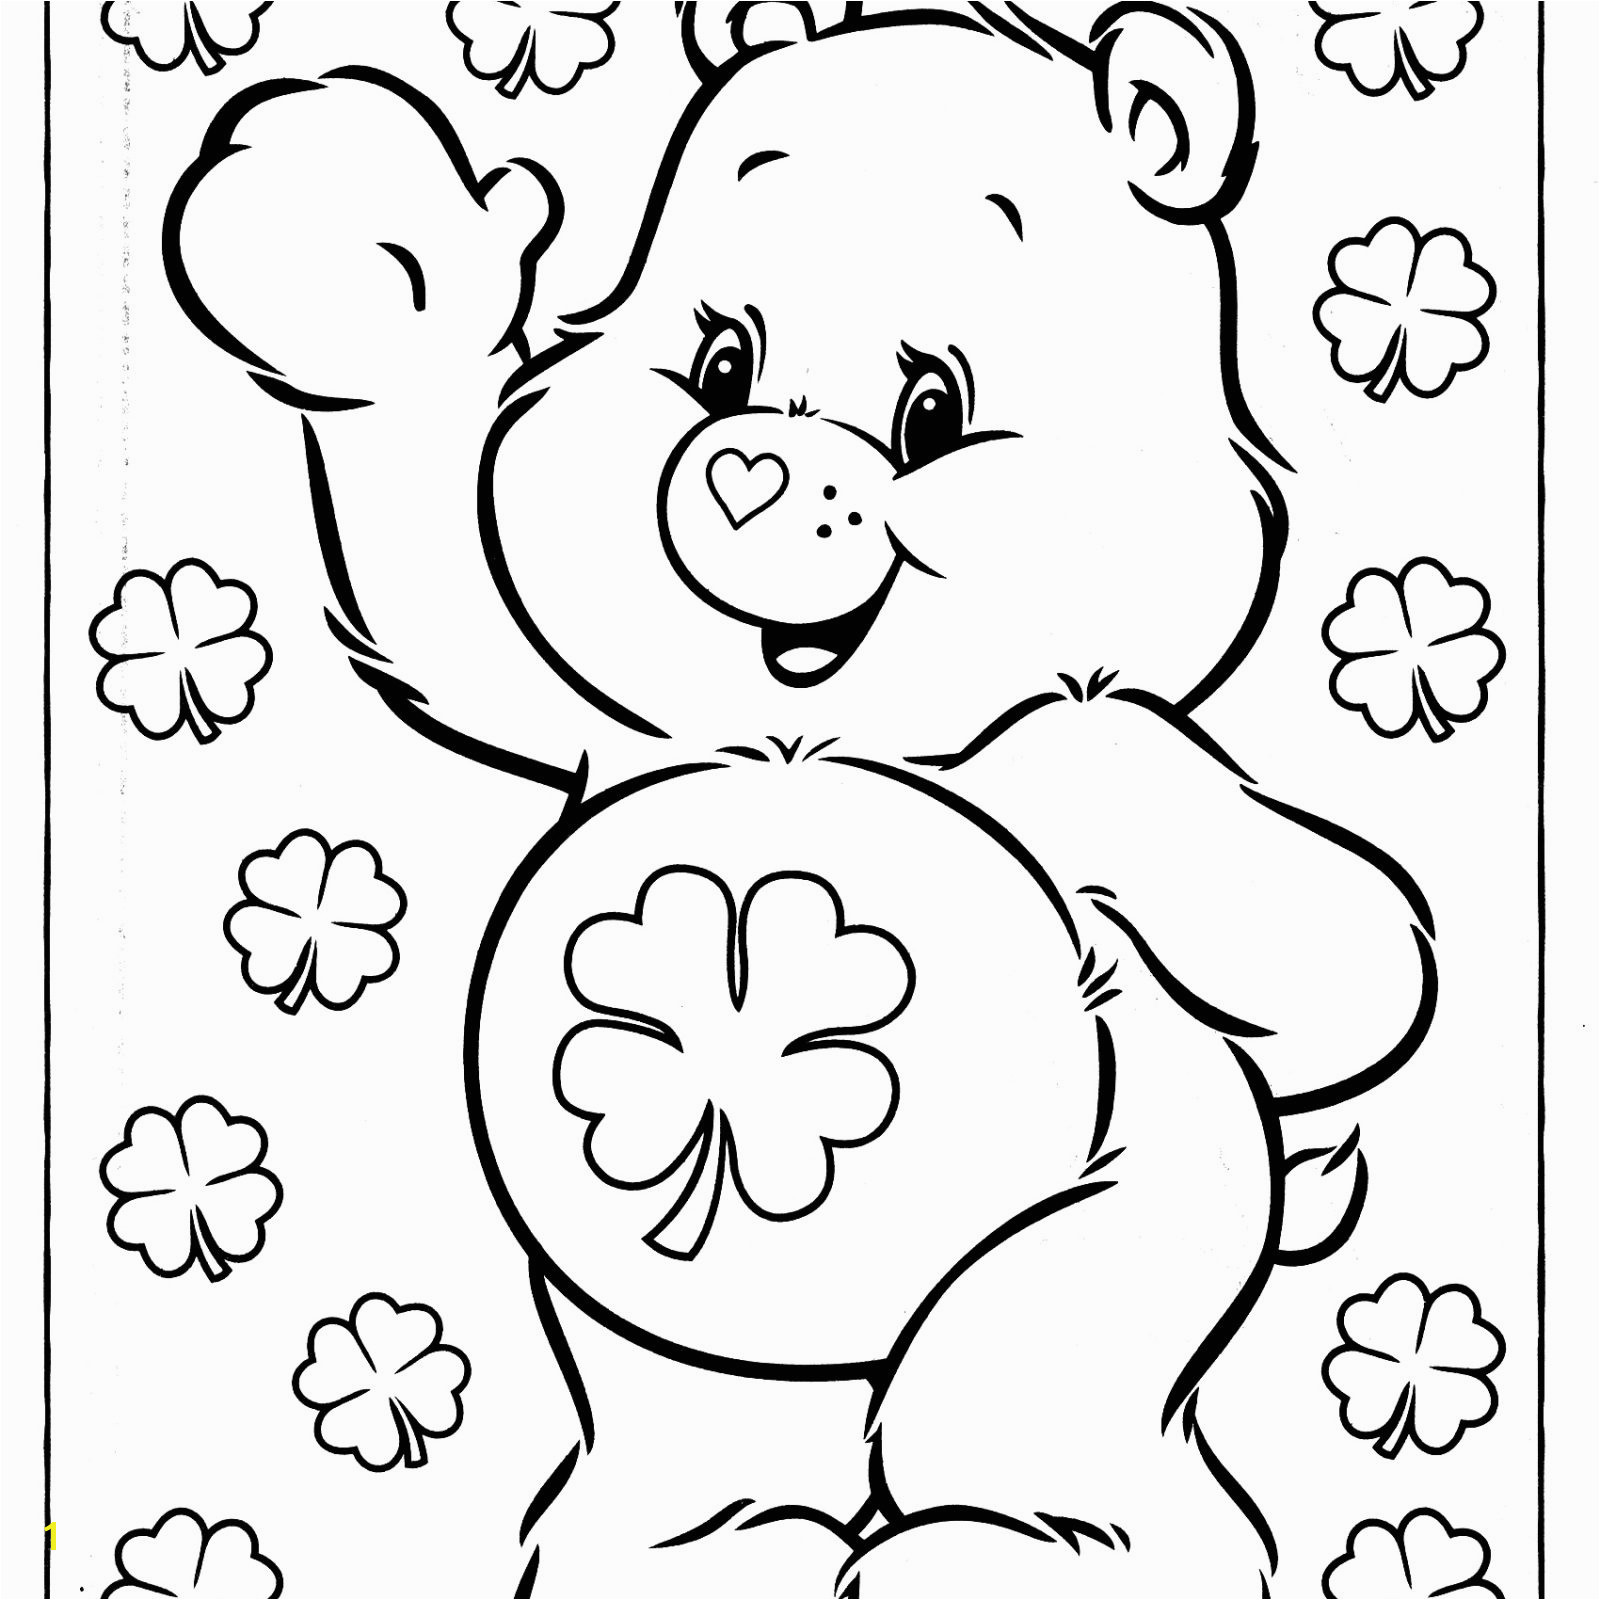 Dancing Bear Coloring Page Medquit Care Bears 20 Cartoons – Printable Coloring Pages Care